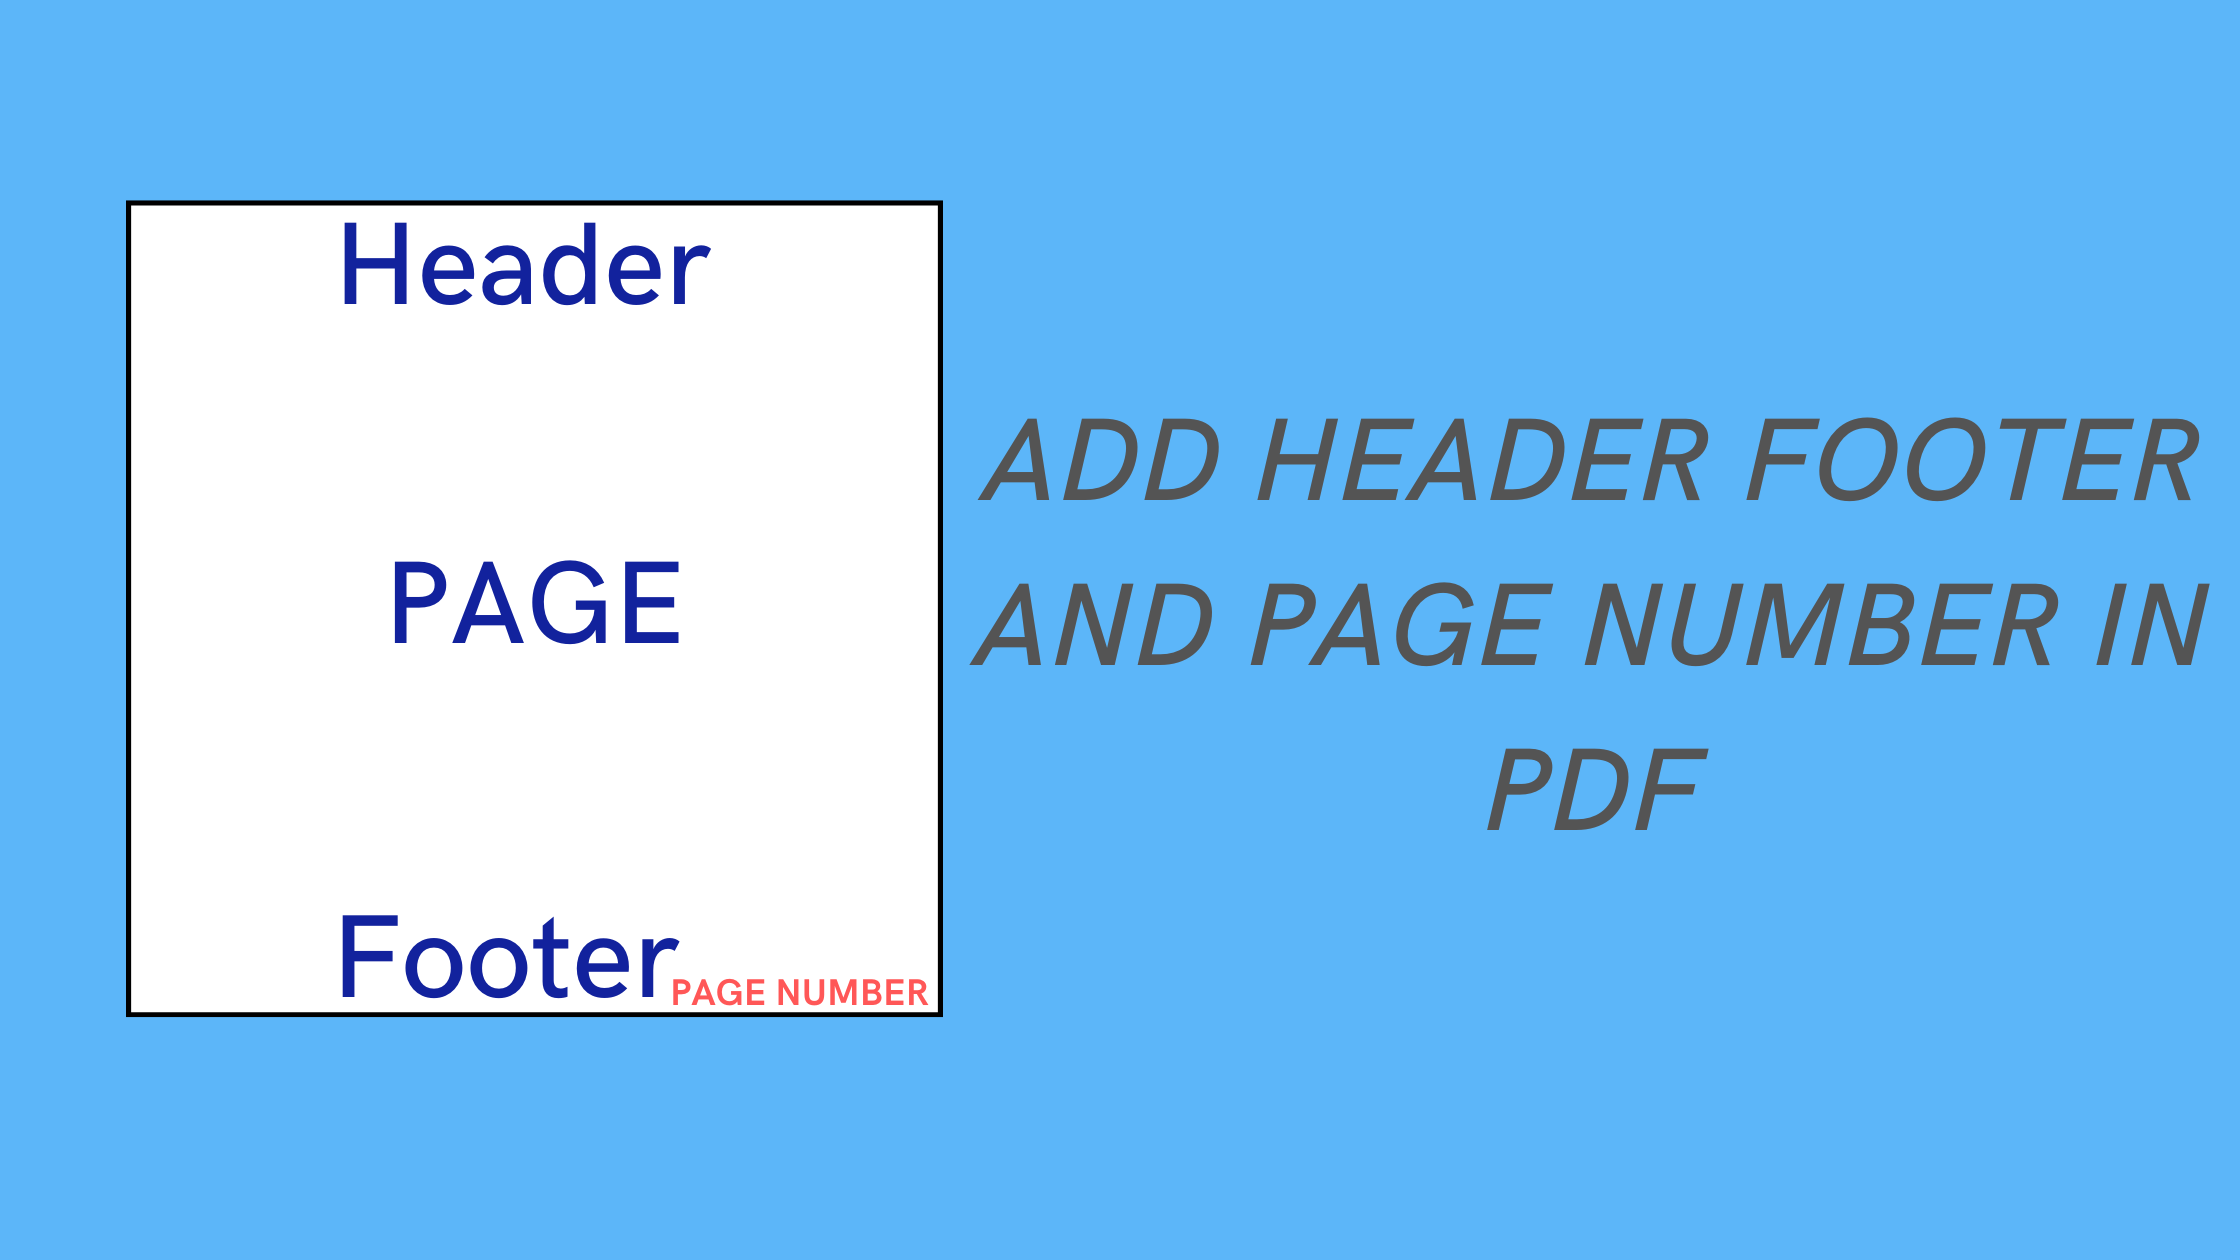 add header footer and page number in pdf